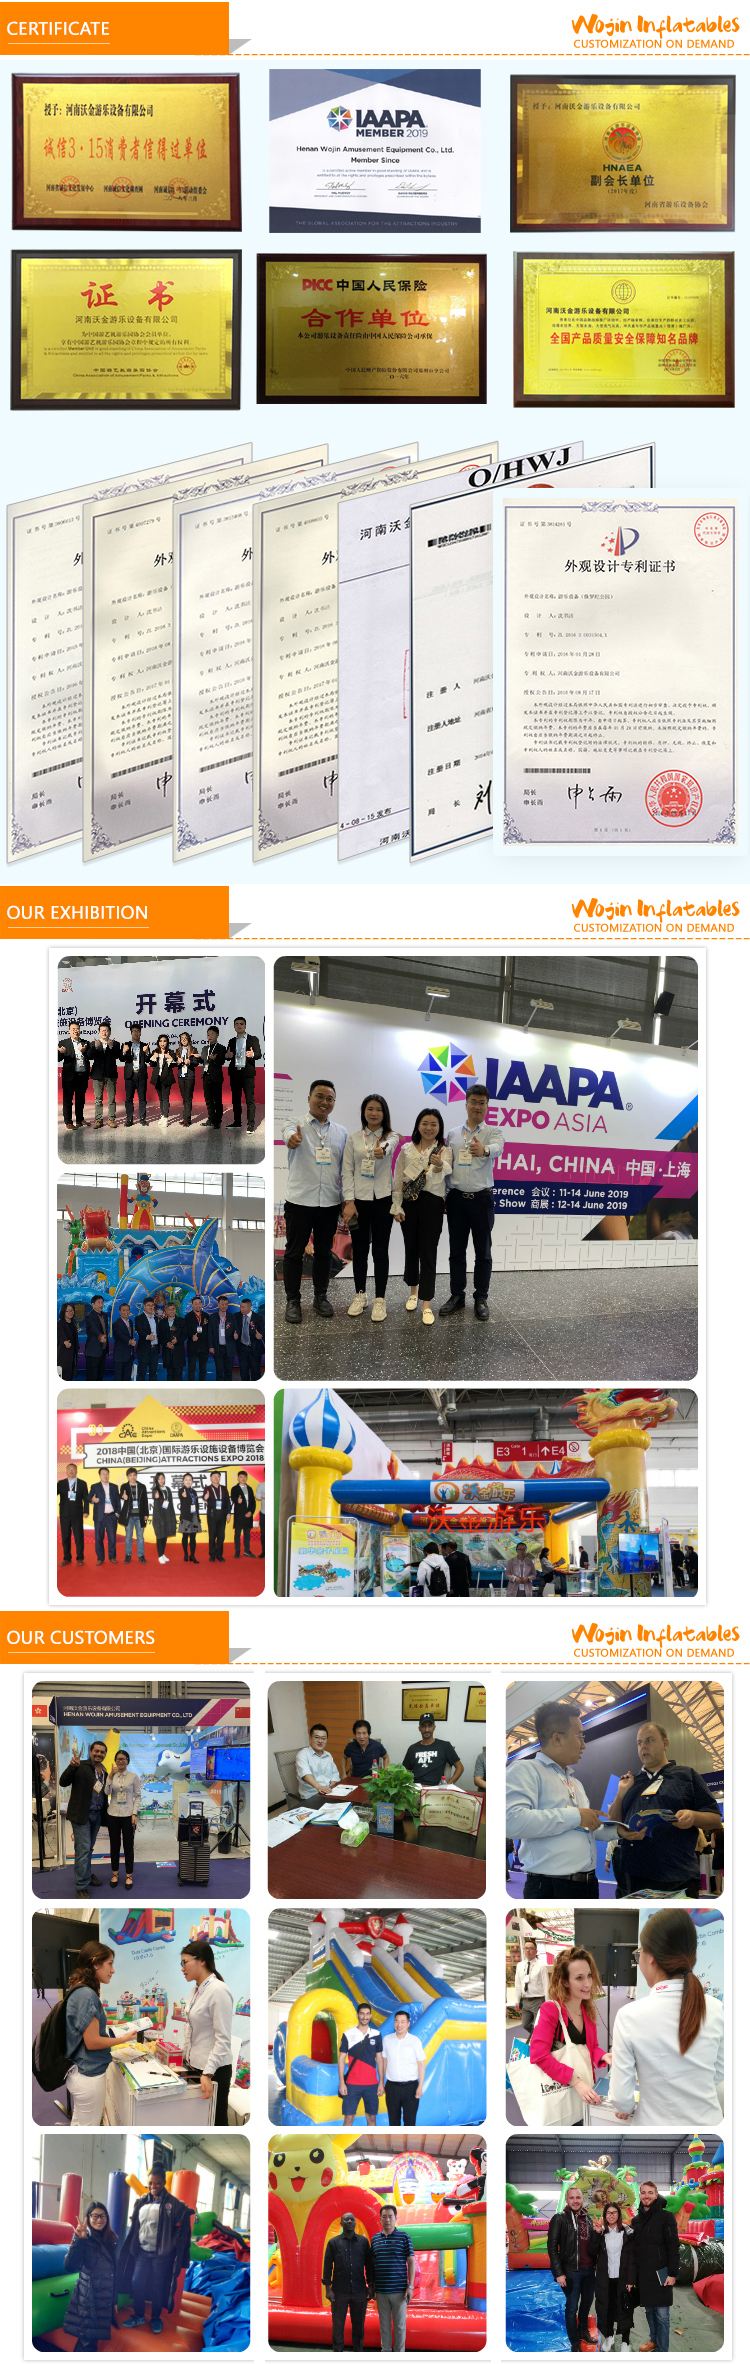 customize art panel inflatable water slide jumping castle mega combo for kids party event